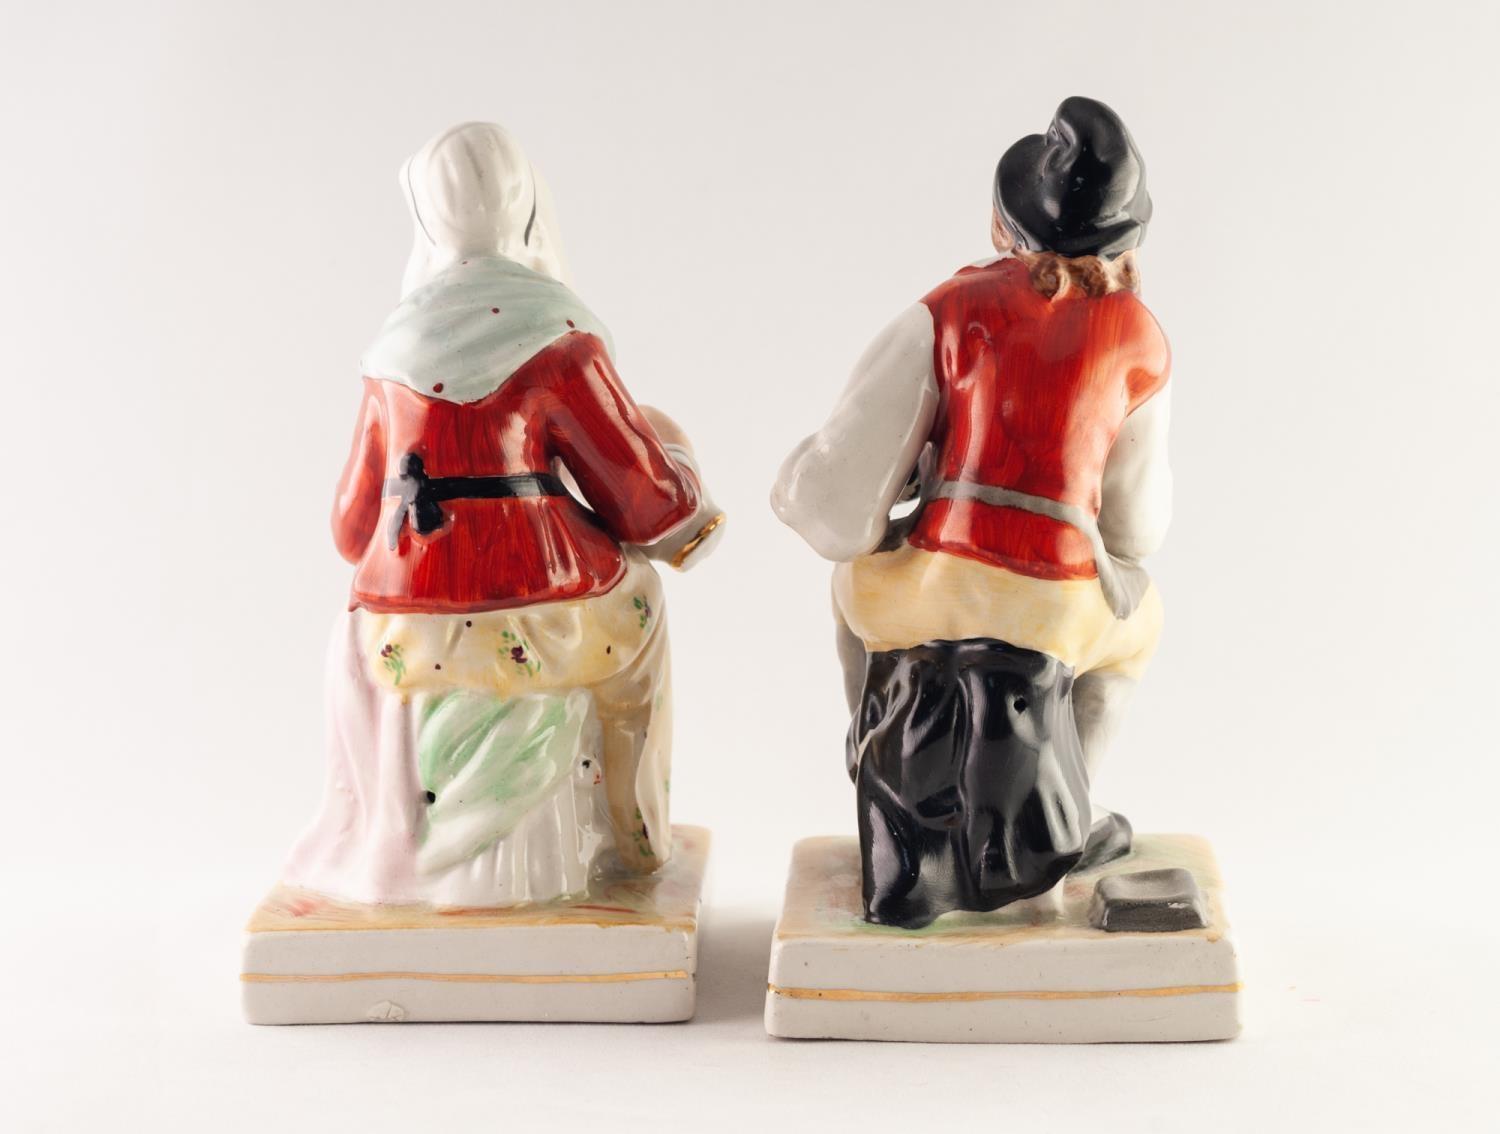 PAIR OF NINETEENTH CENTURY STYLE REPRODUCTION POTTERY FIGURES OF A COBBLER AND HIS WIFE, each - Image 2 of 2